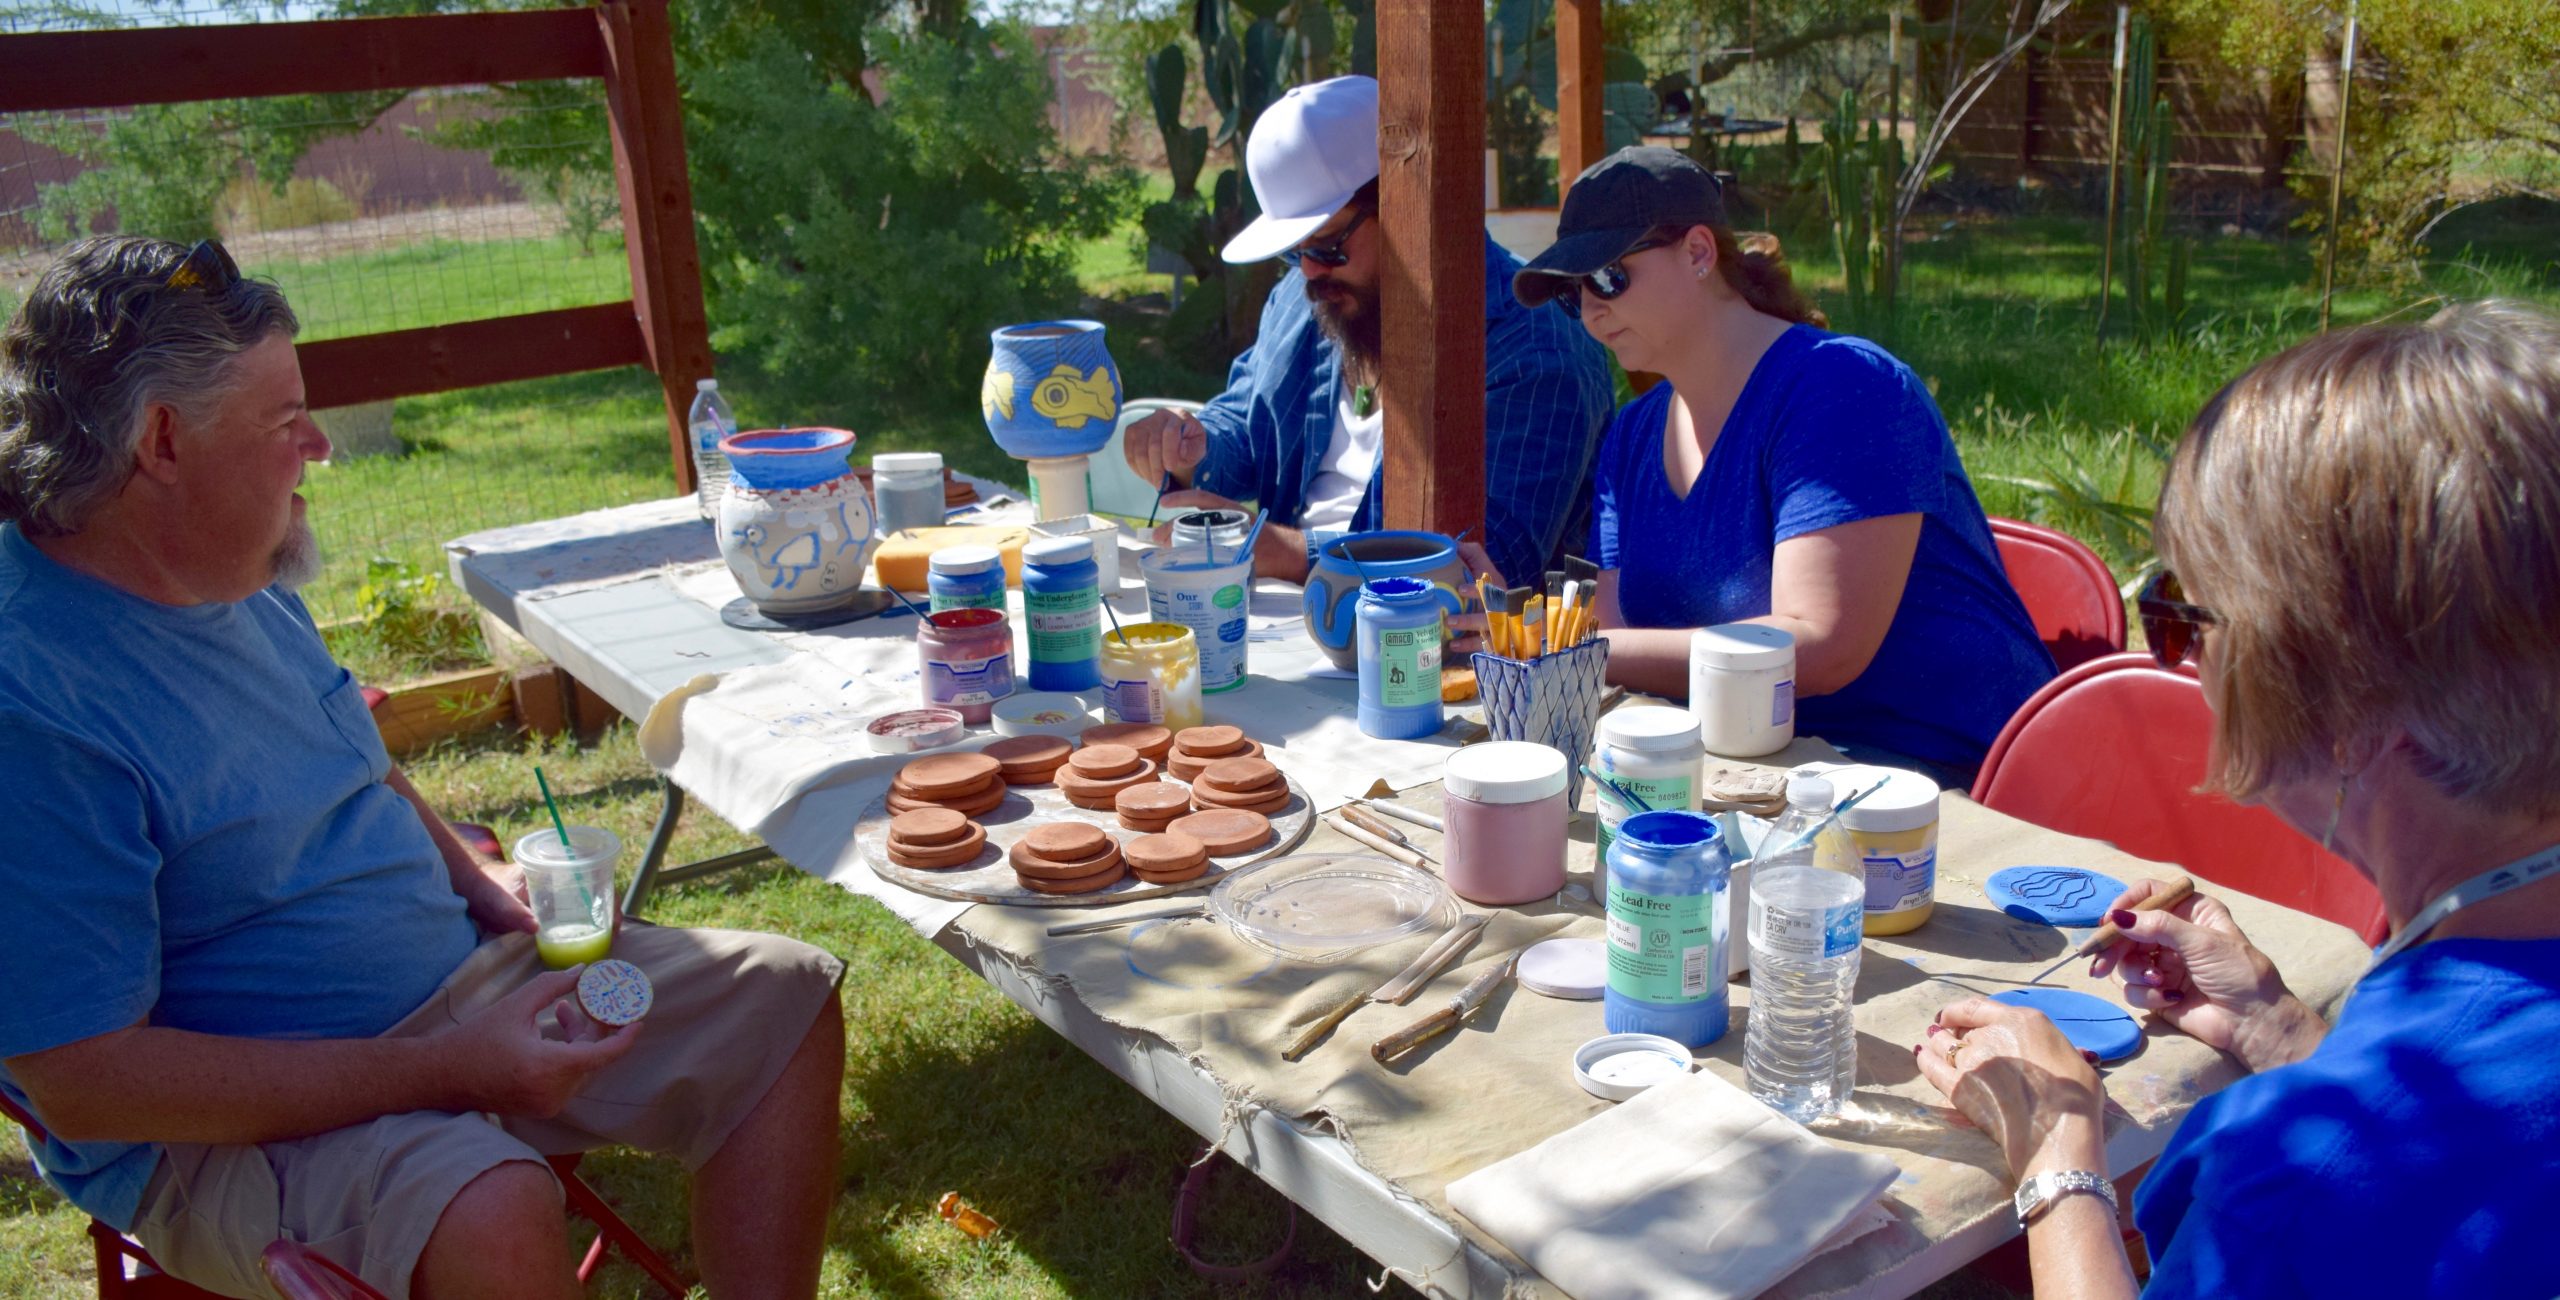 Community members painting ceramic disks for the project.